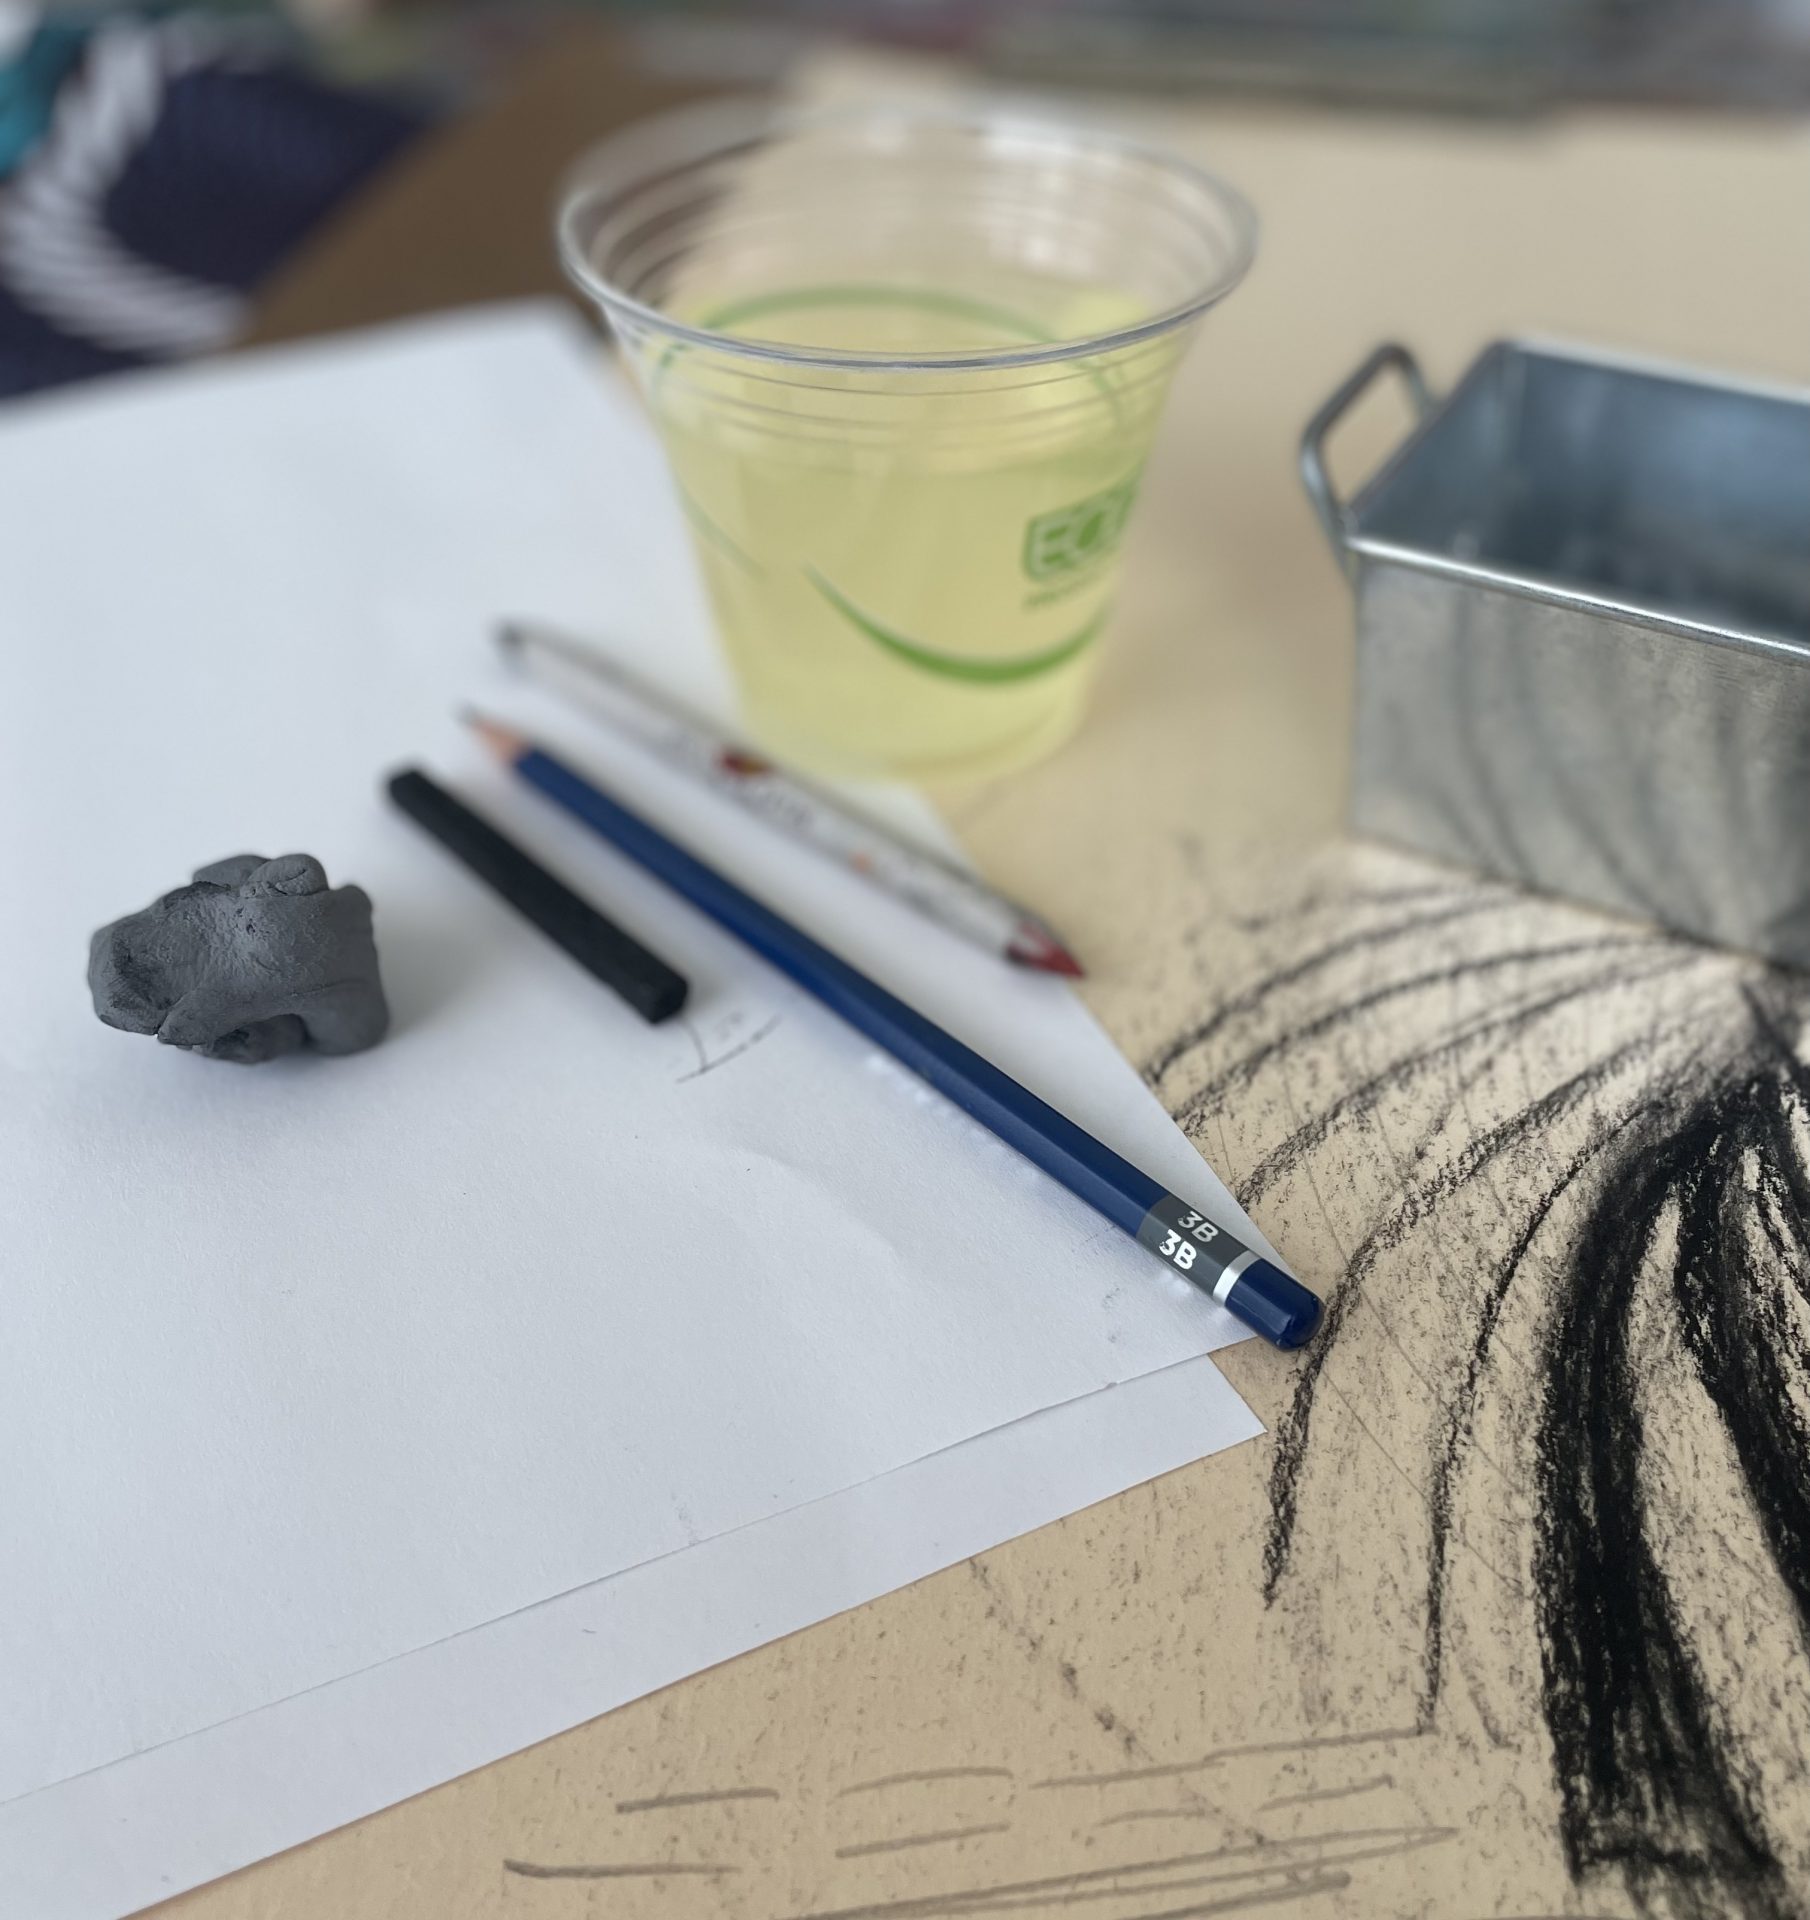 A disposable class filled with white wine sits on a table with drawing materials